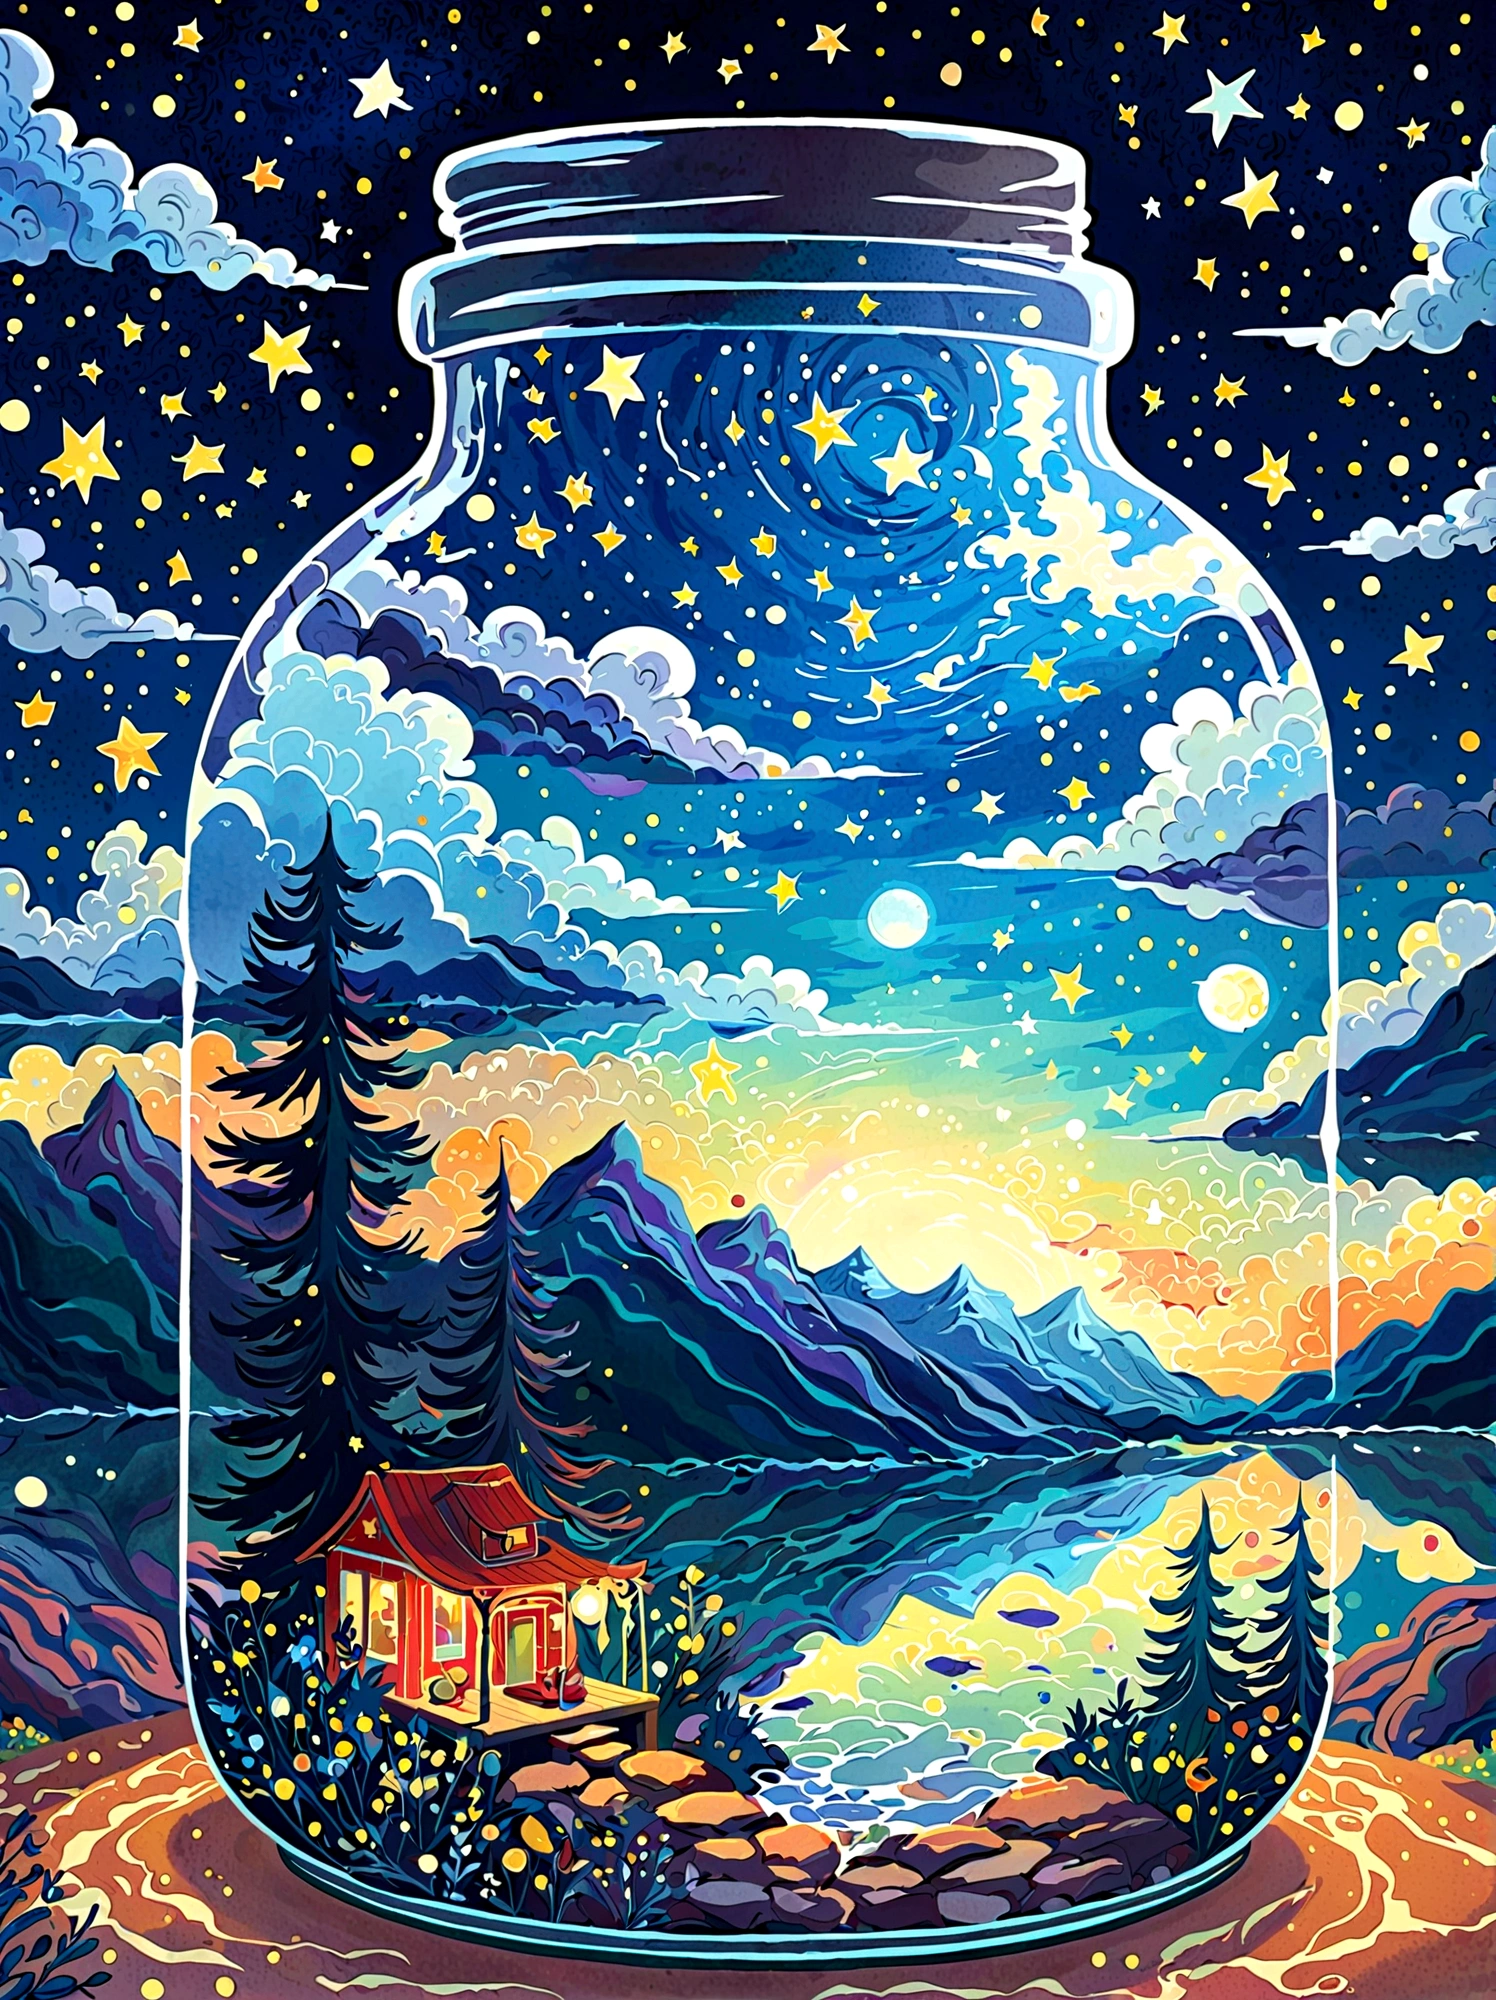 1pzsj1, Masterpiece，Top quality，(Very delicate and beautiful starry sky scenery trapped in a jar), world masterpiece theater, High resolution isometric, Top quality, illustration, Thick coating, canvas, painting, realism, Realism